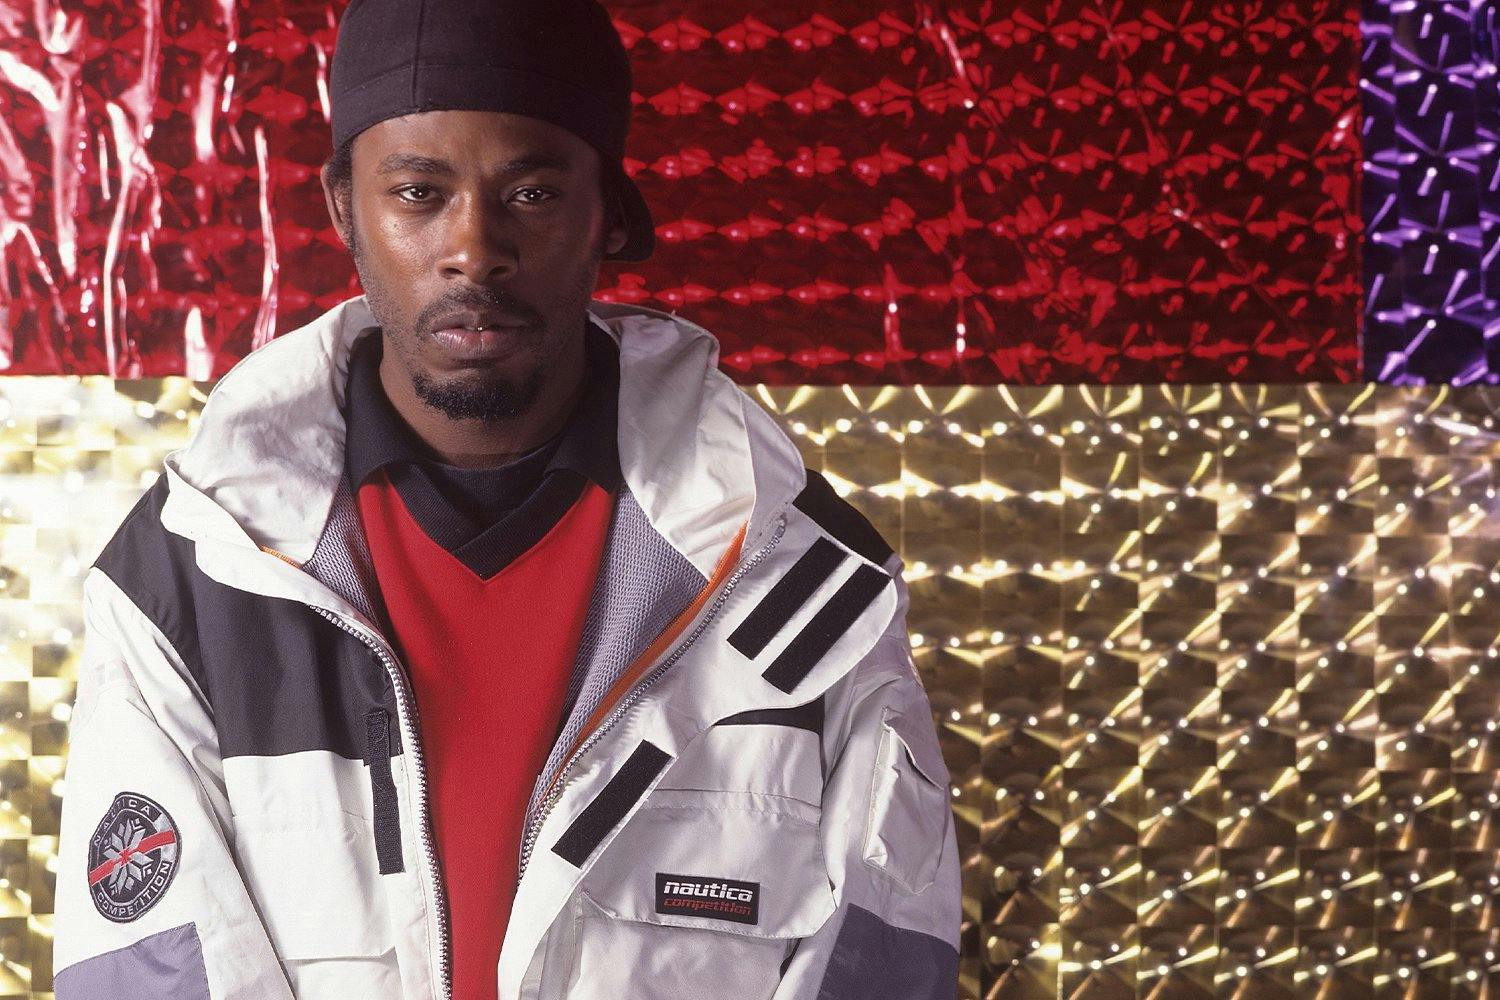 American rap artist GZA of the rap group Wu-Tang Clan poses for a April 1997 portrait in New York City, New York. (Photo by Bob Berg/Getty Images)